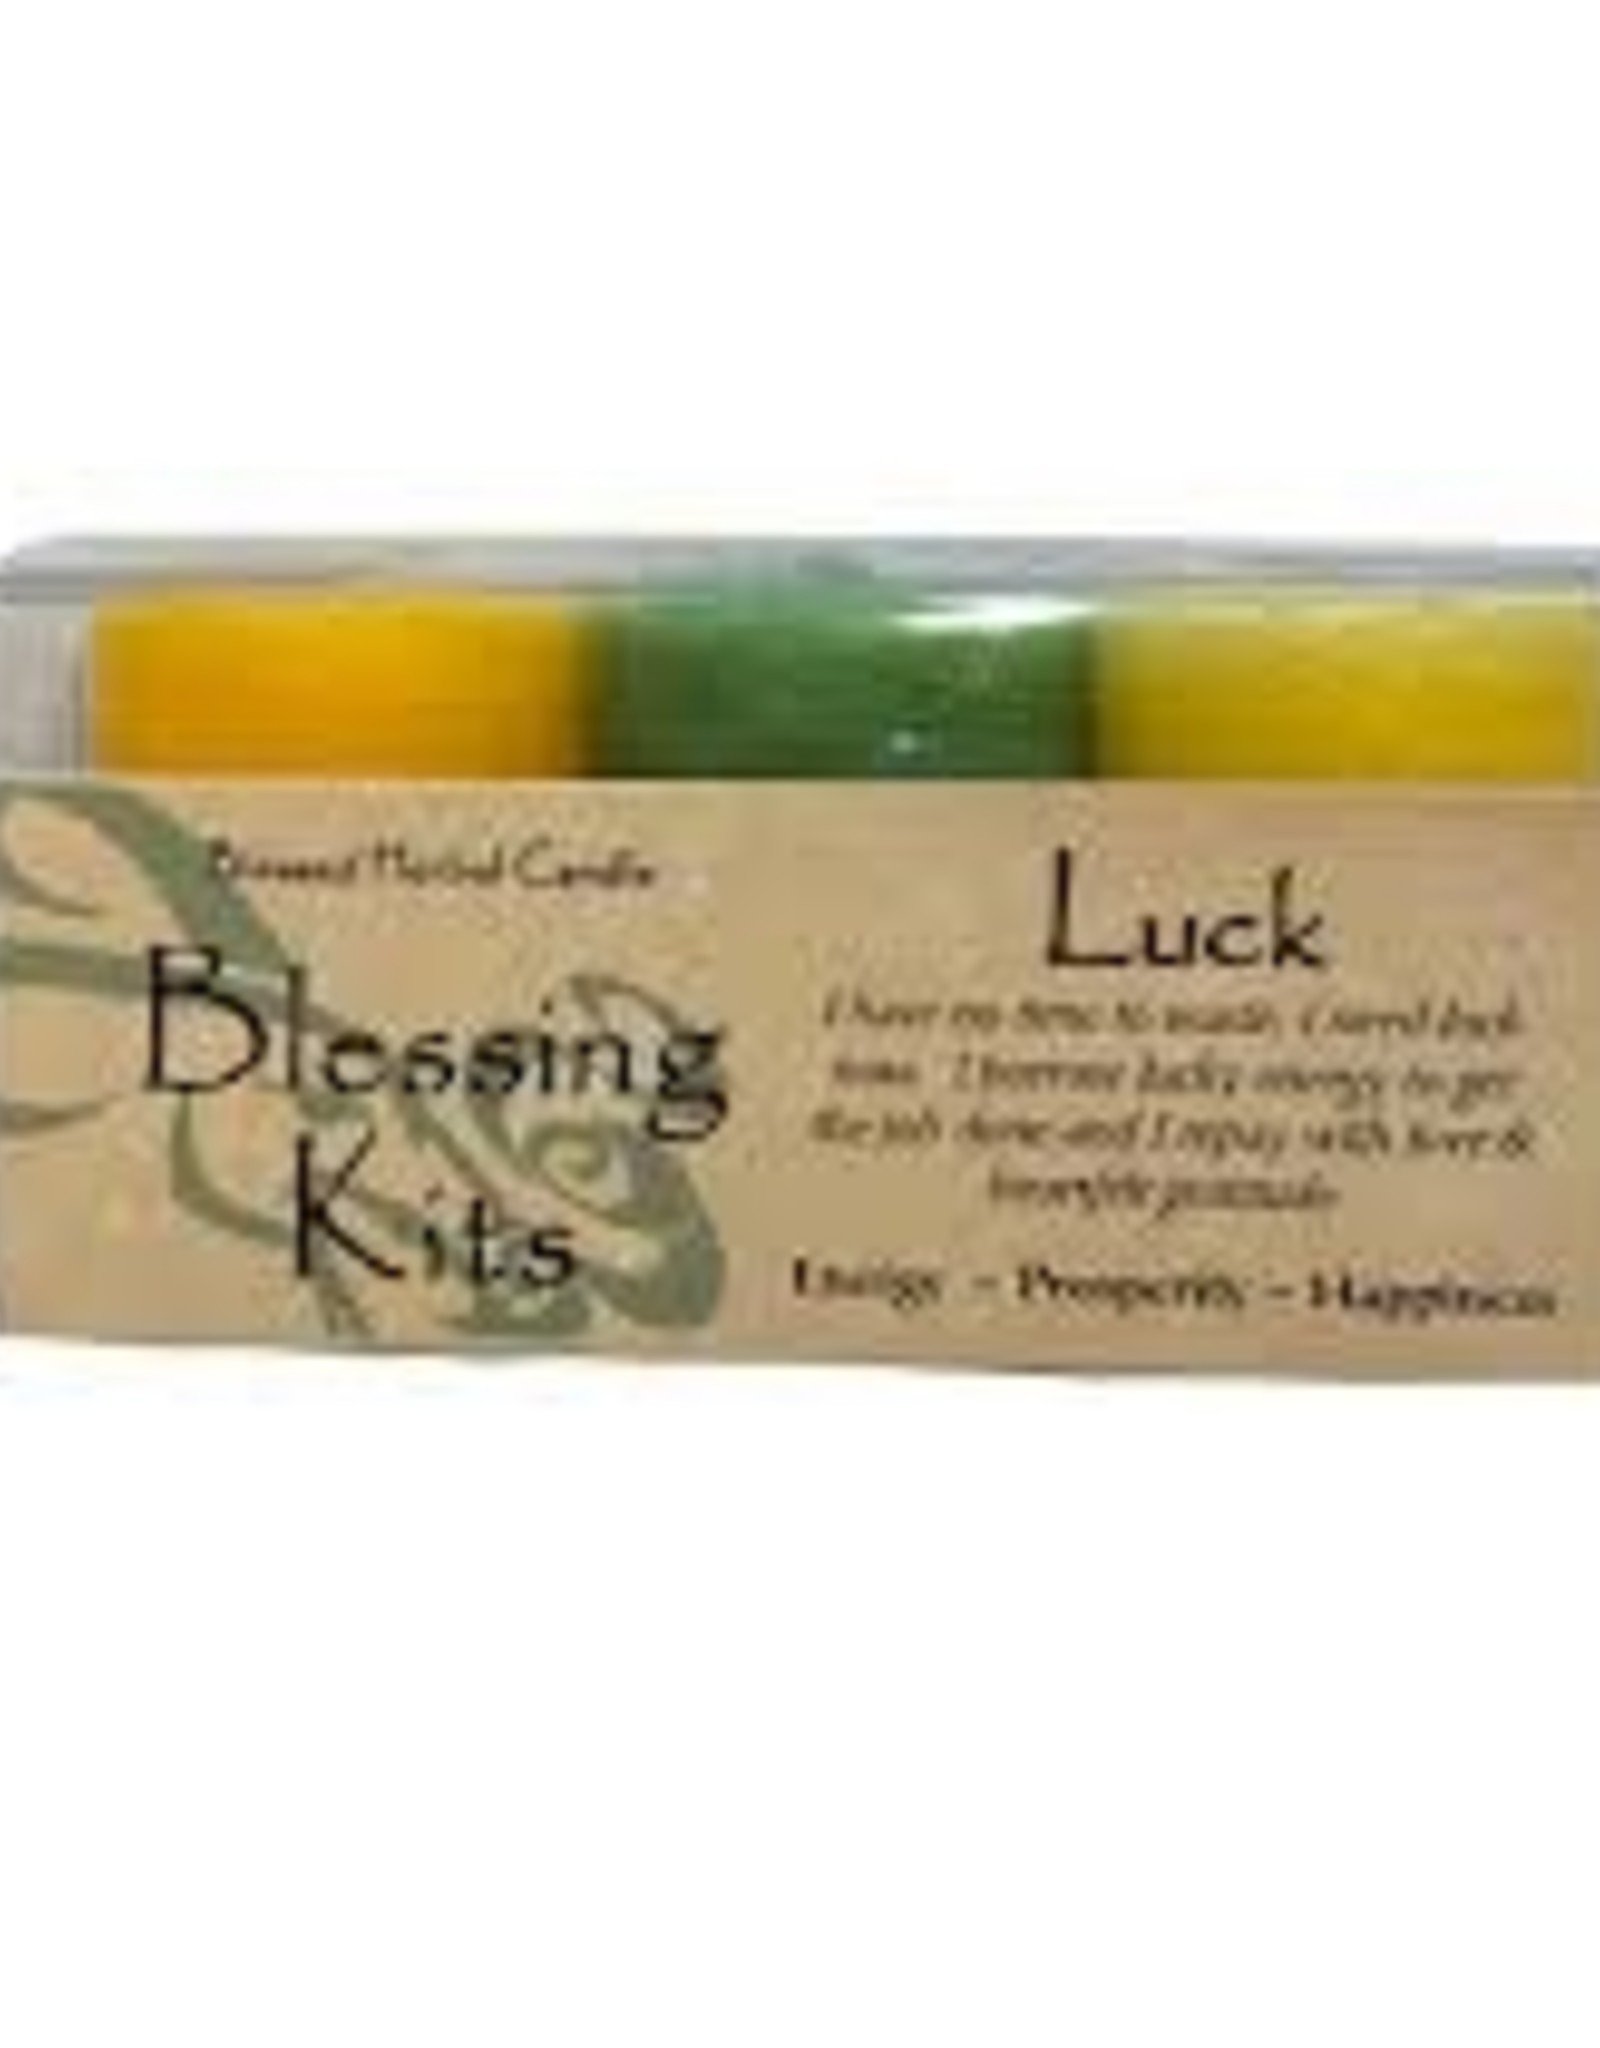 Coventry Creations Candle Blessing Kits - Luck